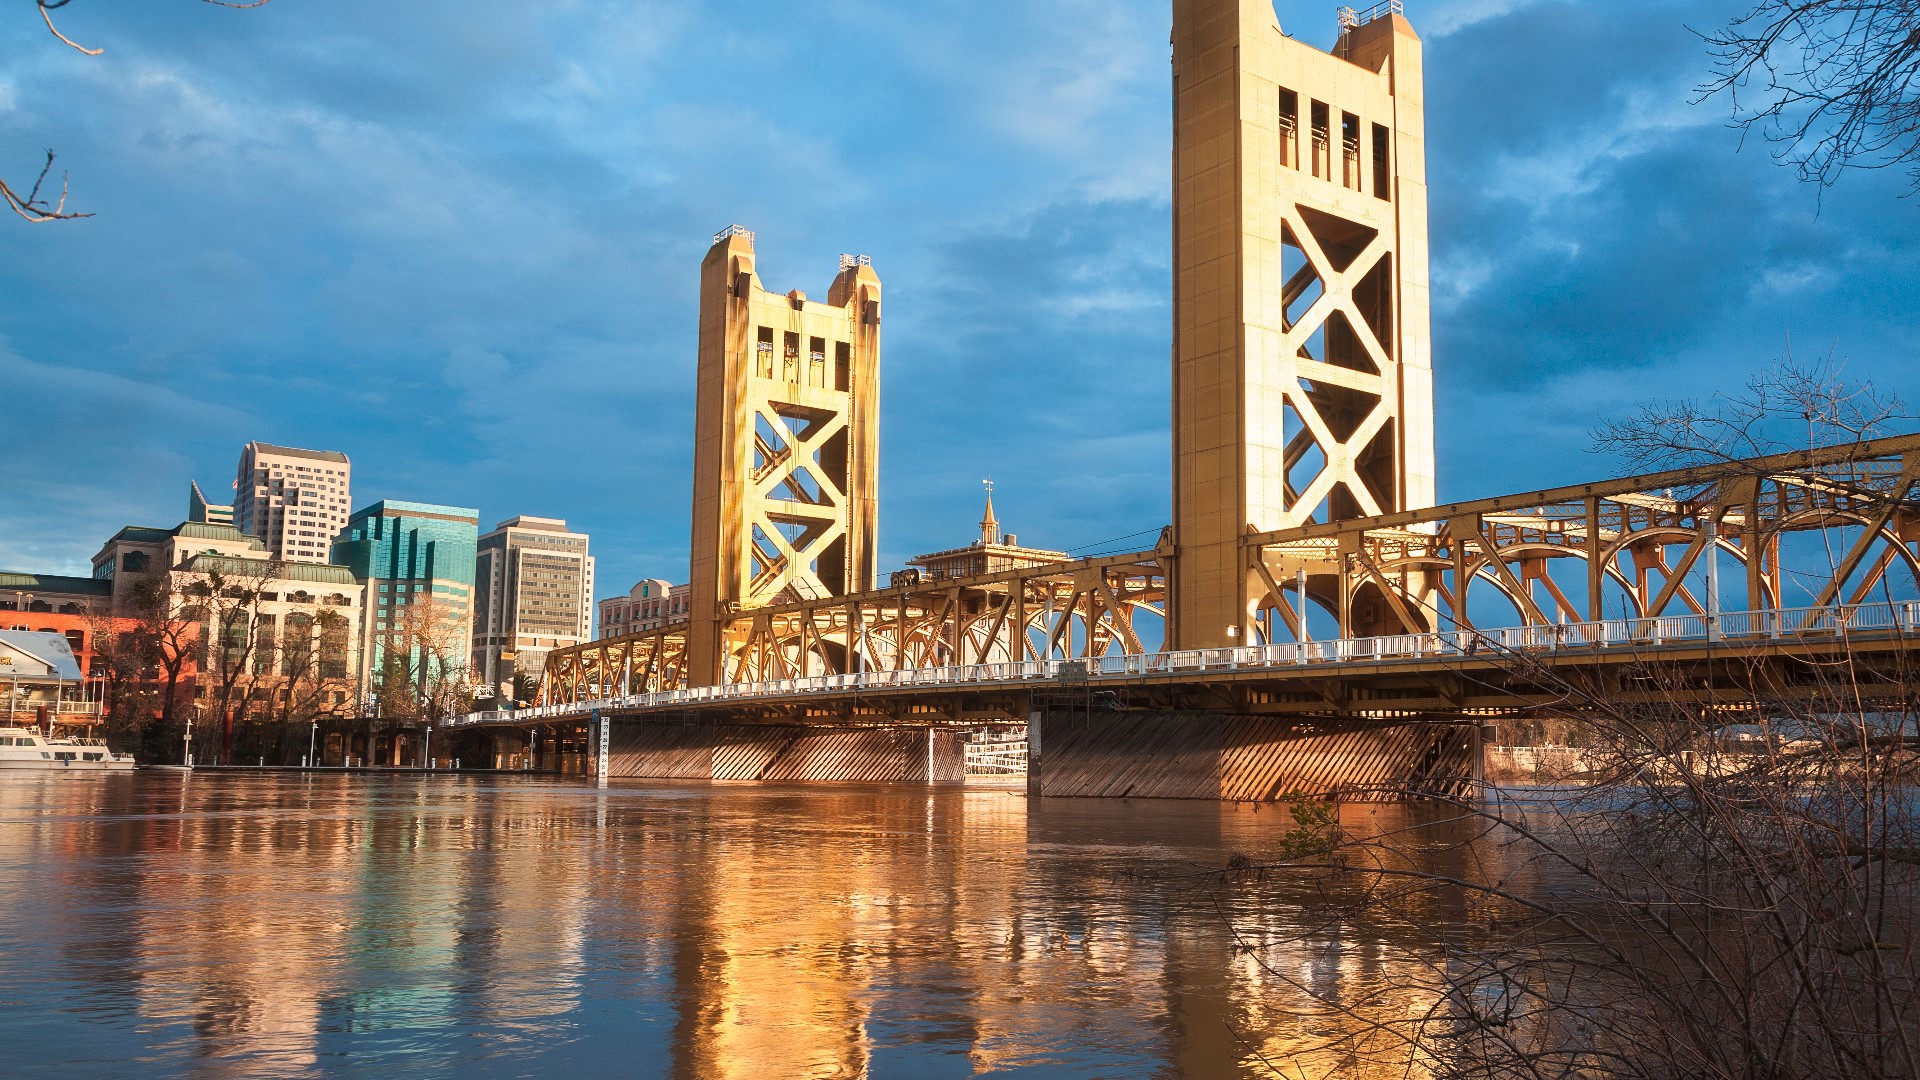 One study found downtown Sacramento can be over 7° warmer than surrounding areas.